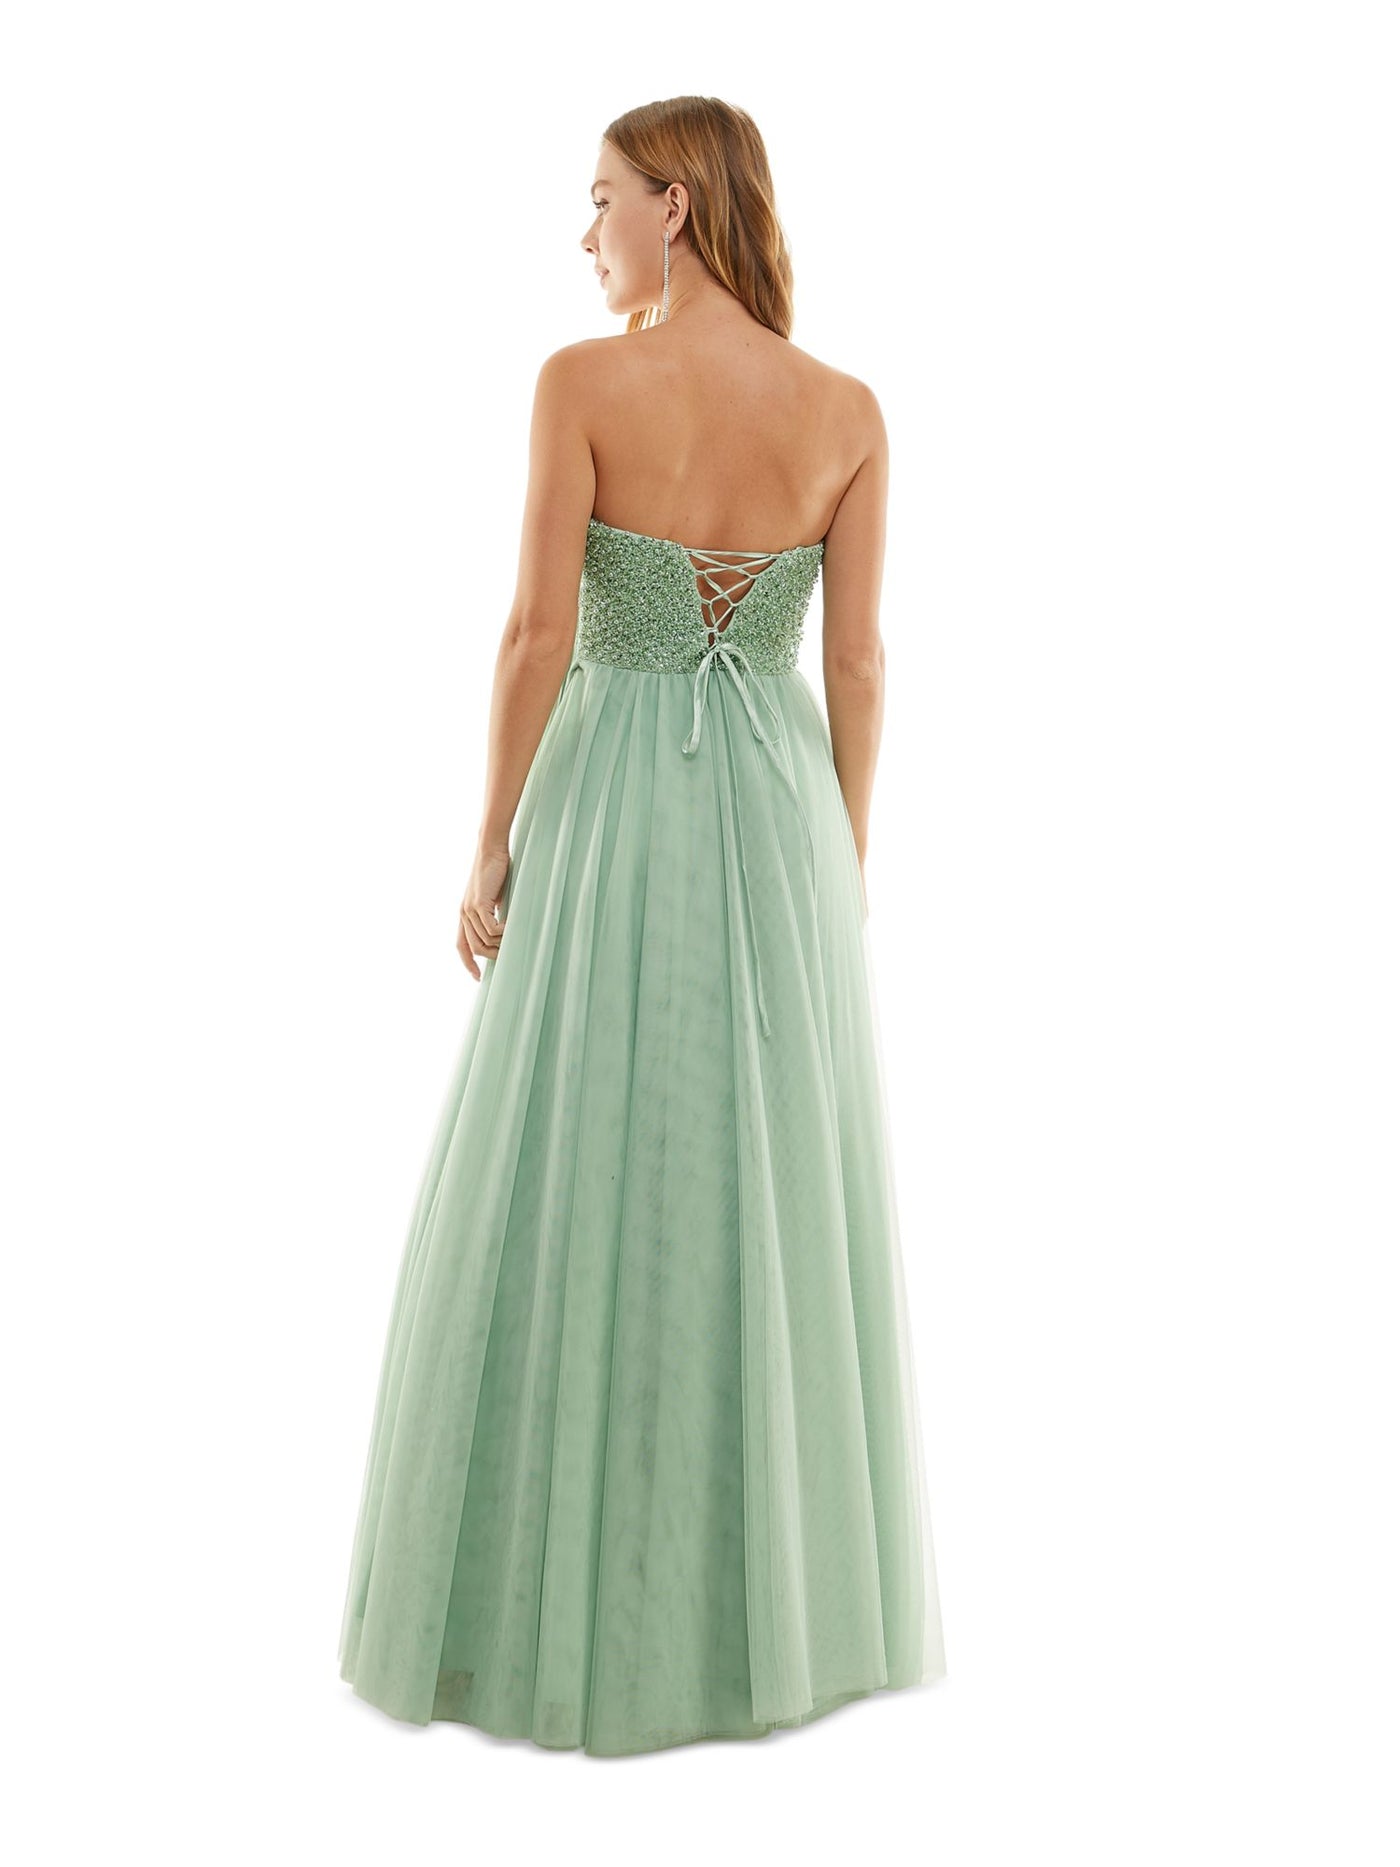 SAY YES TO THE PROM Womens Green Embellished Zippered Padded Lined Tulle Mesh Sleeveless Sweetheart Neckline Full-Length Party Gown Dress Juniors 0